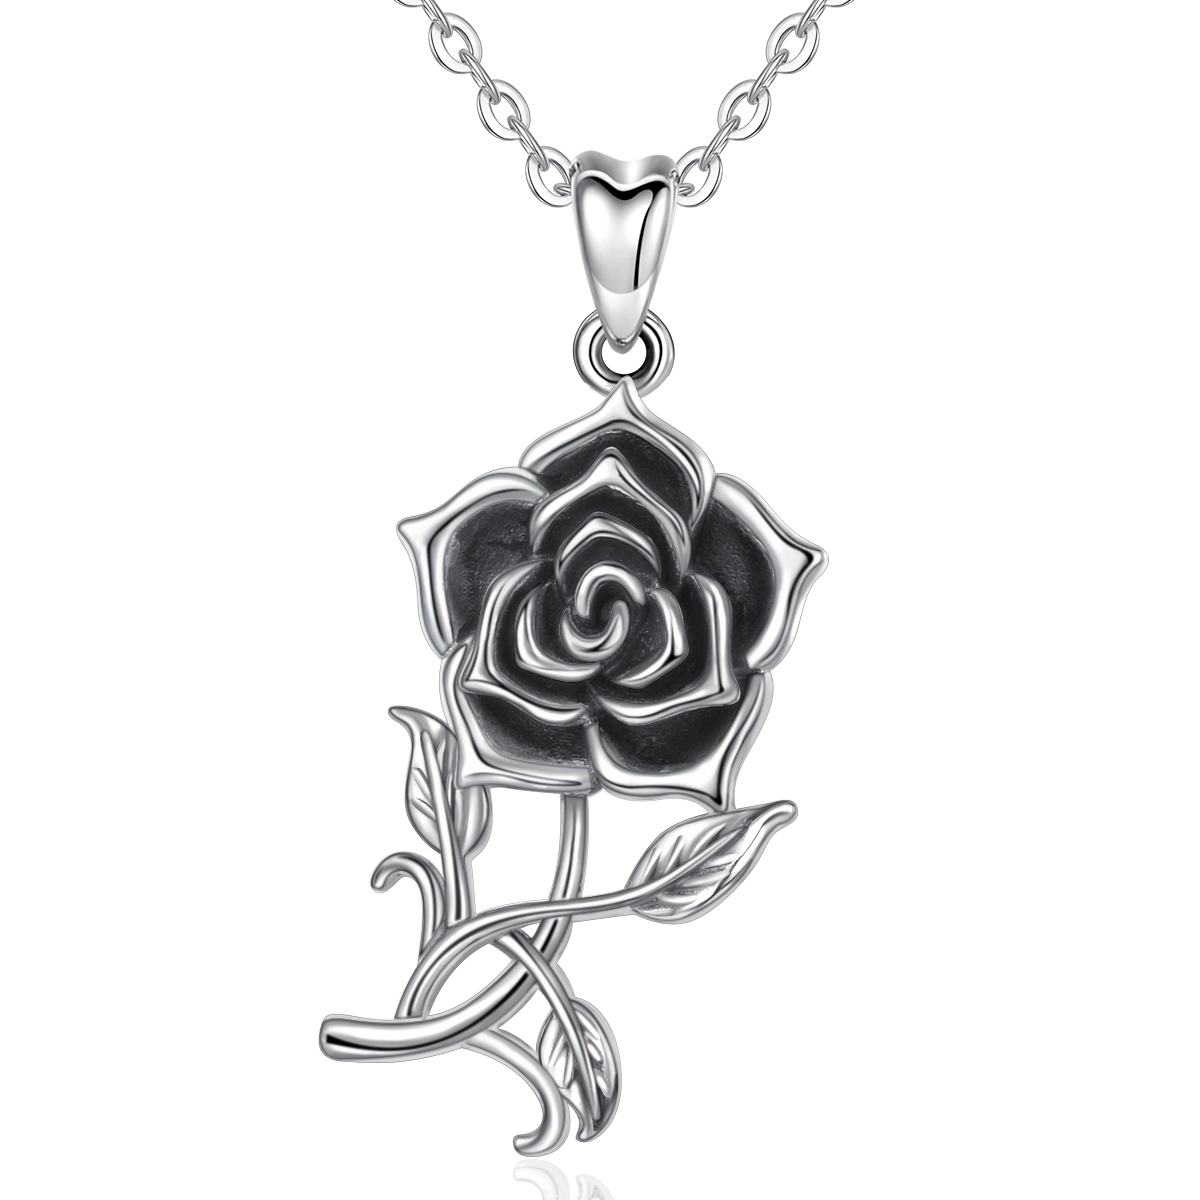 Merryshine Jewelry Vintage Oxidation do old S925 Sterling Silver Rose Pendant Necklace